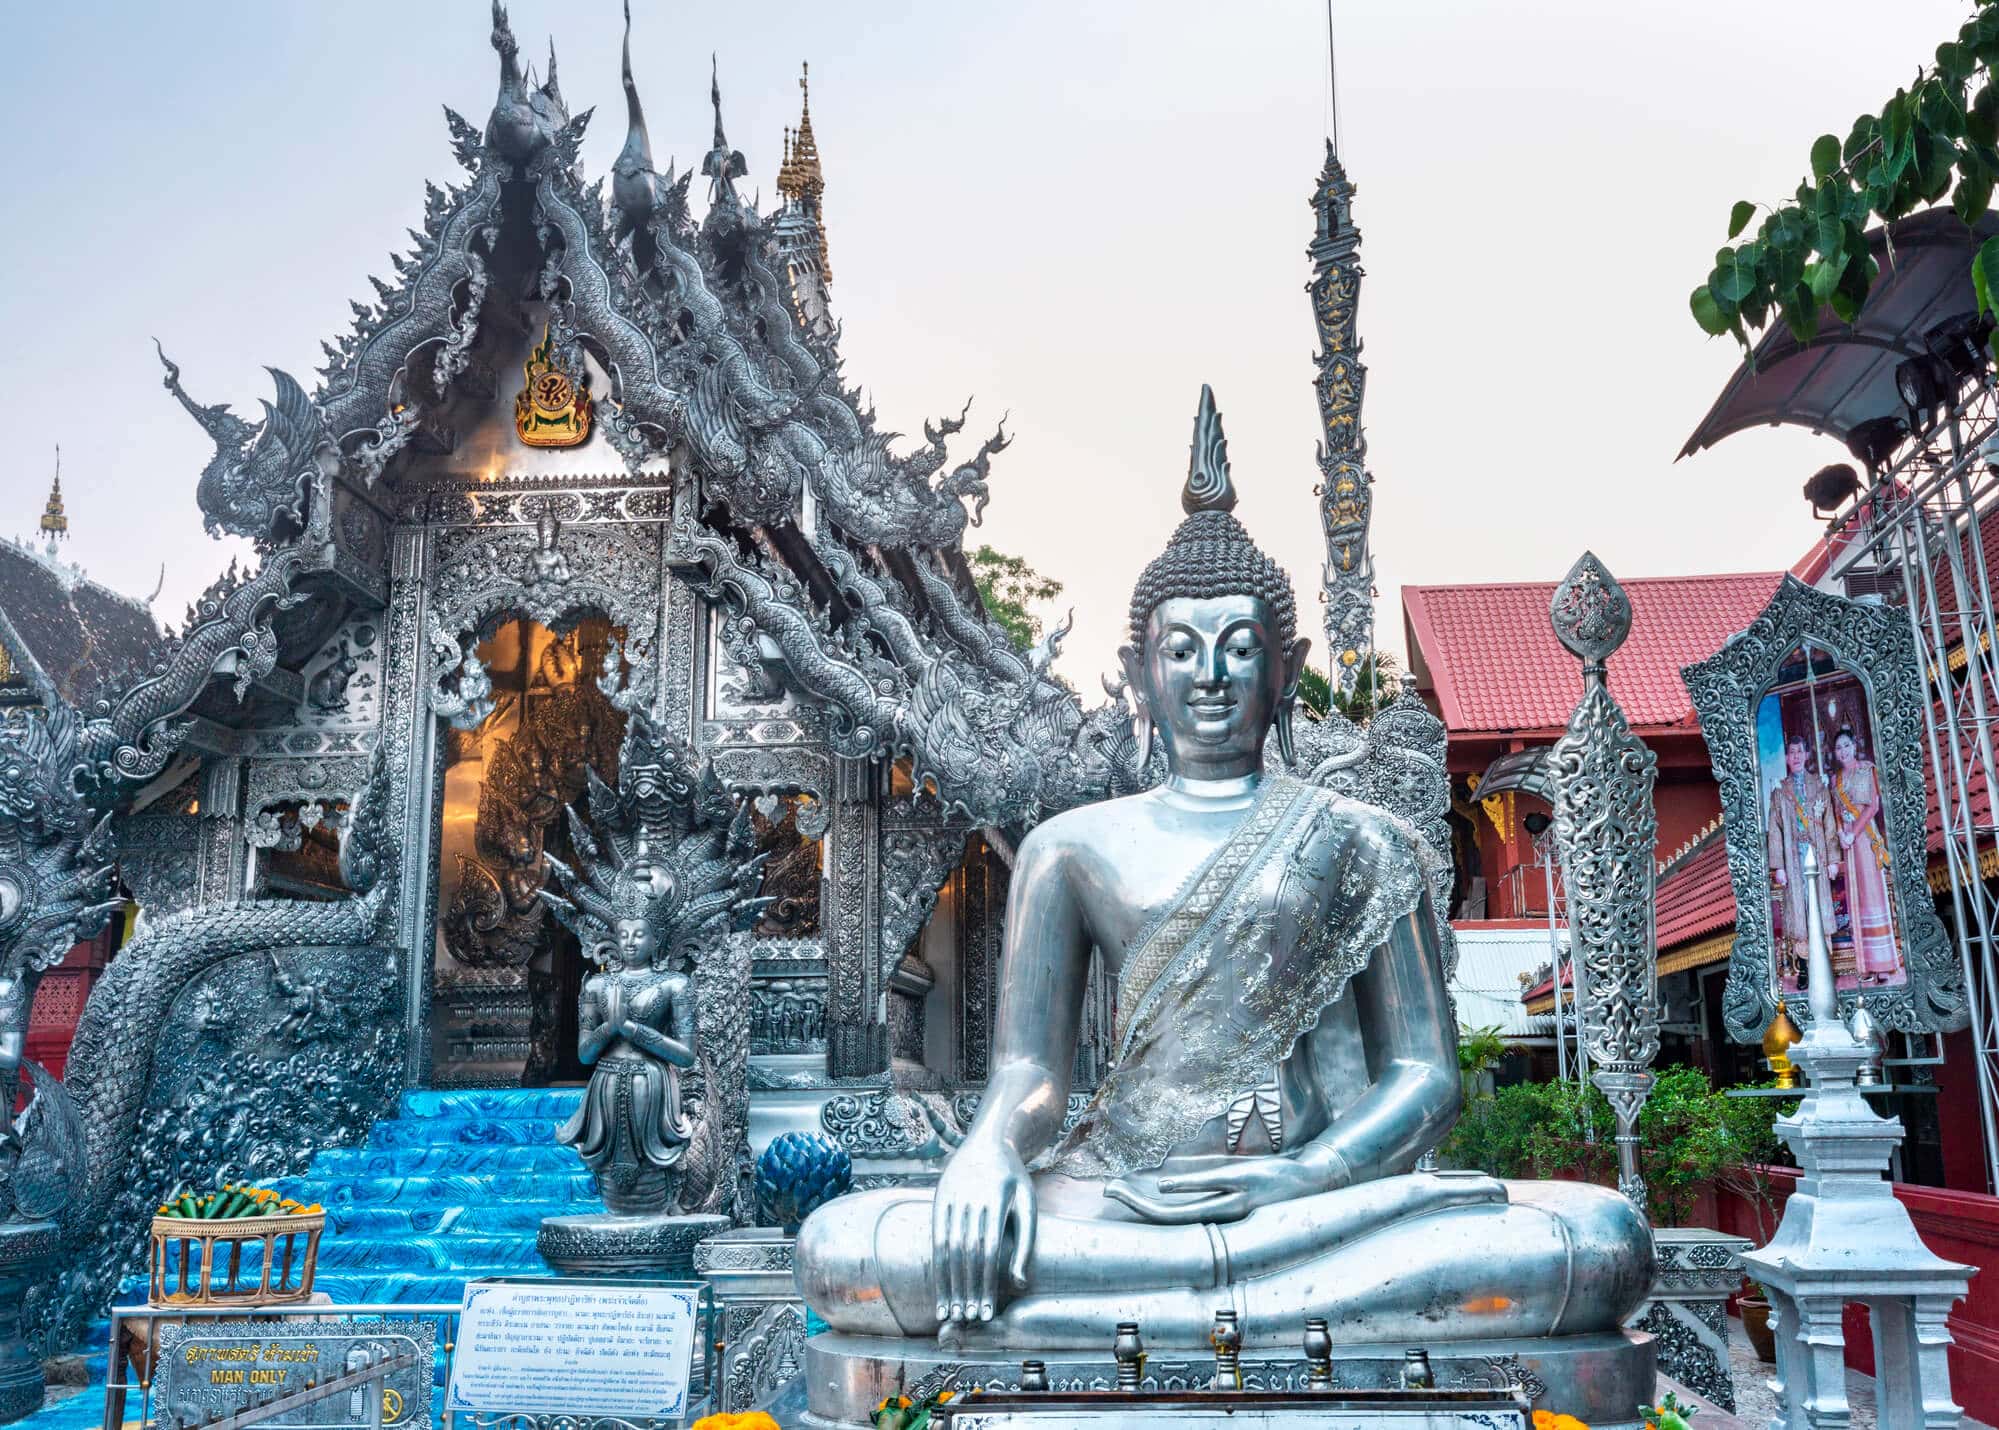 Large silver Buddha statue in front of ornate silver temple Wat Sri Suphan in Chiang Mai.